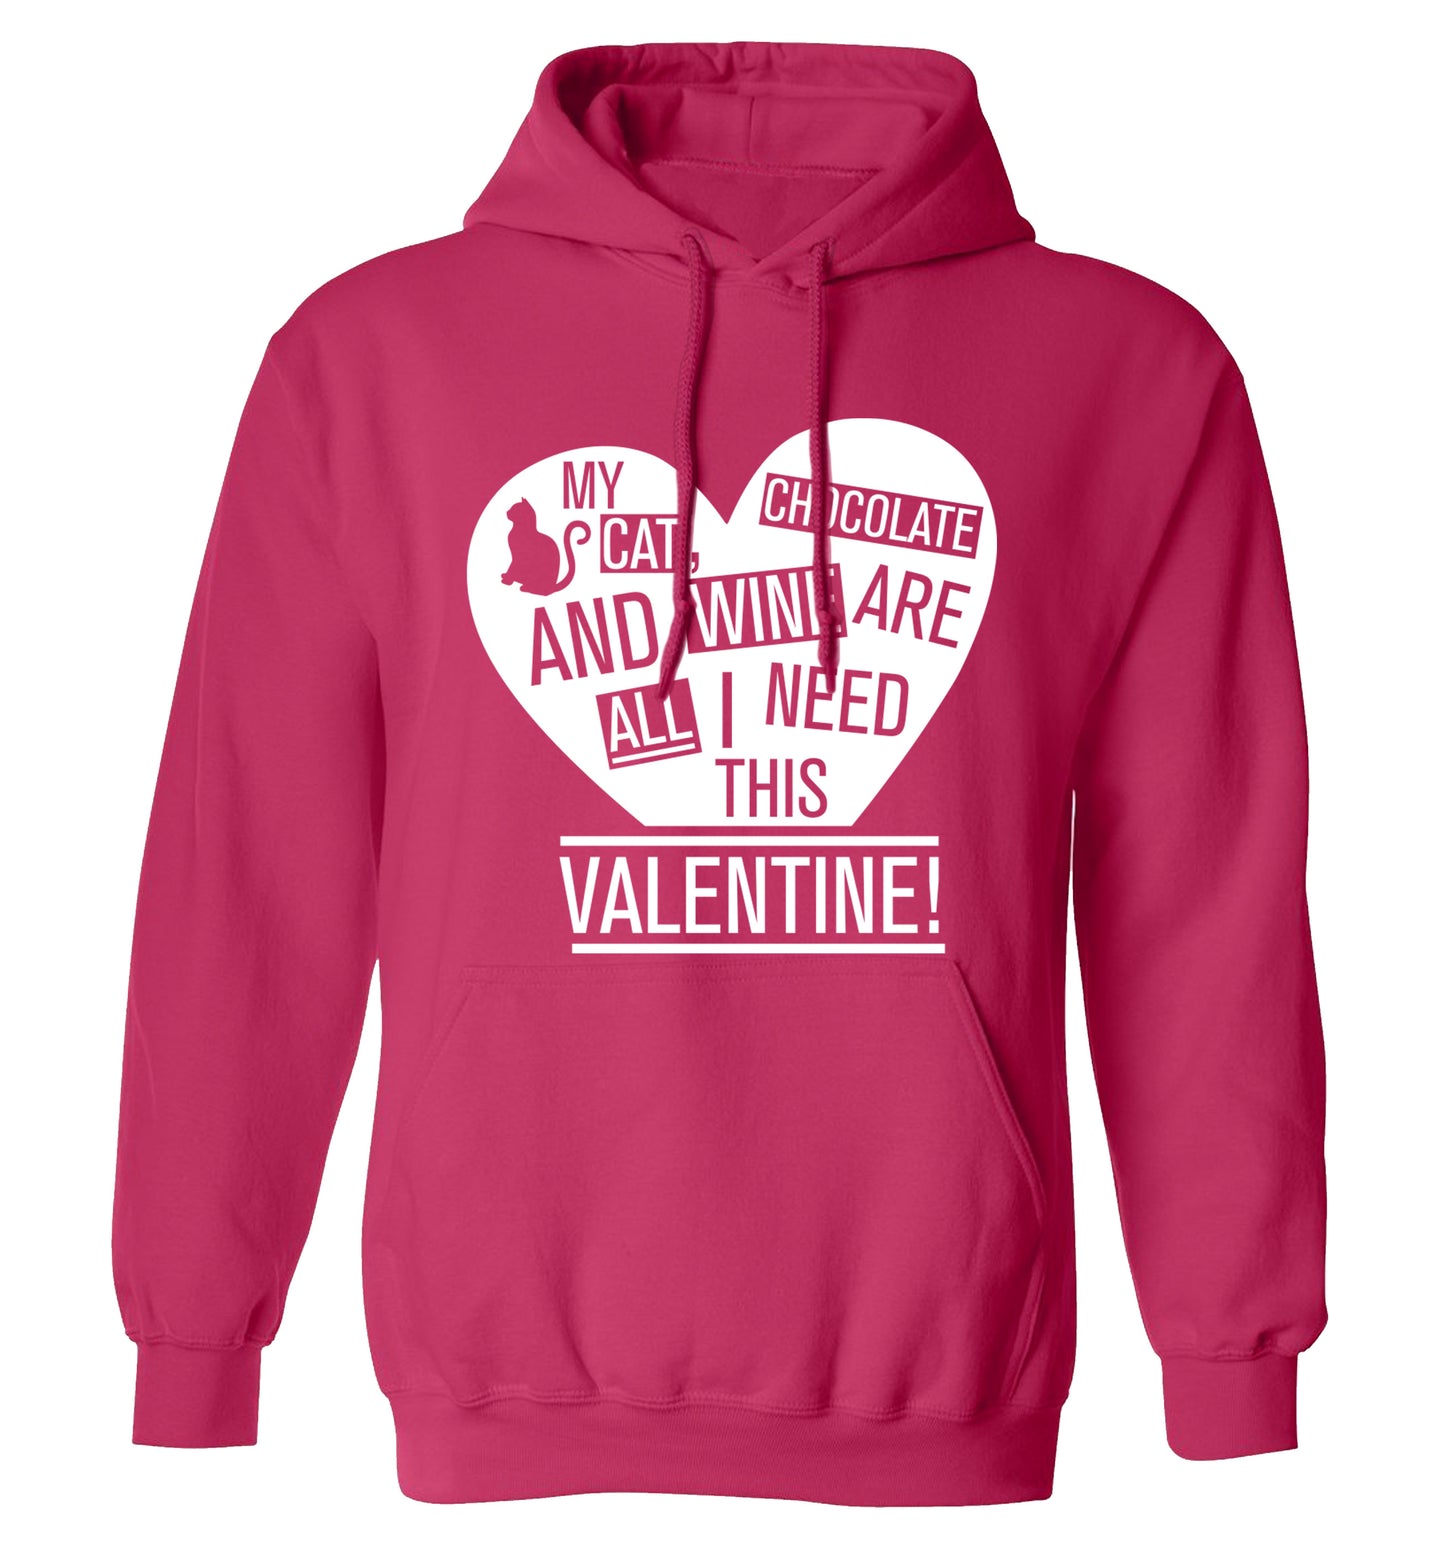 My cat, chocolate and wine are all I need this valentine! adults unisex pink hoodie 2XL